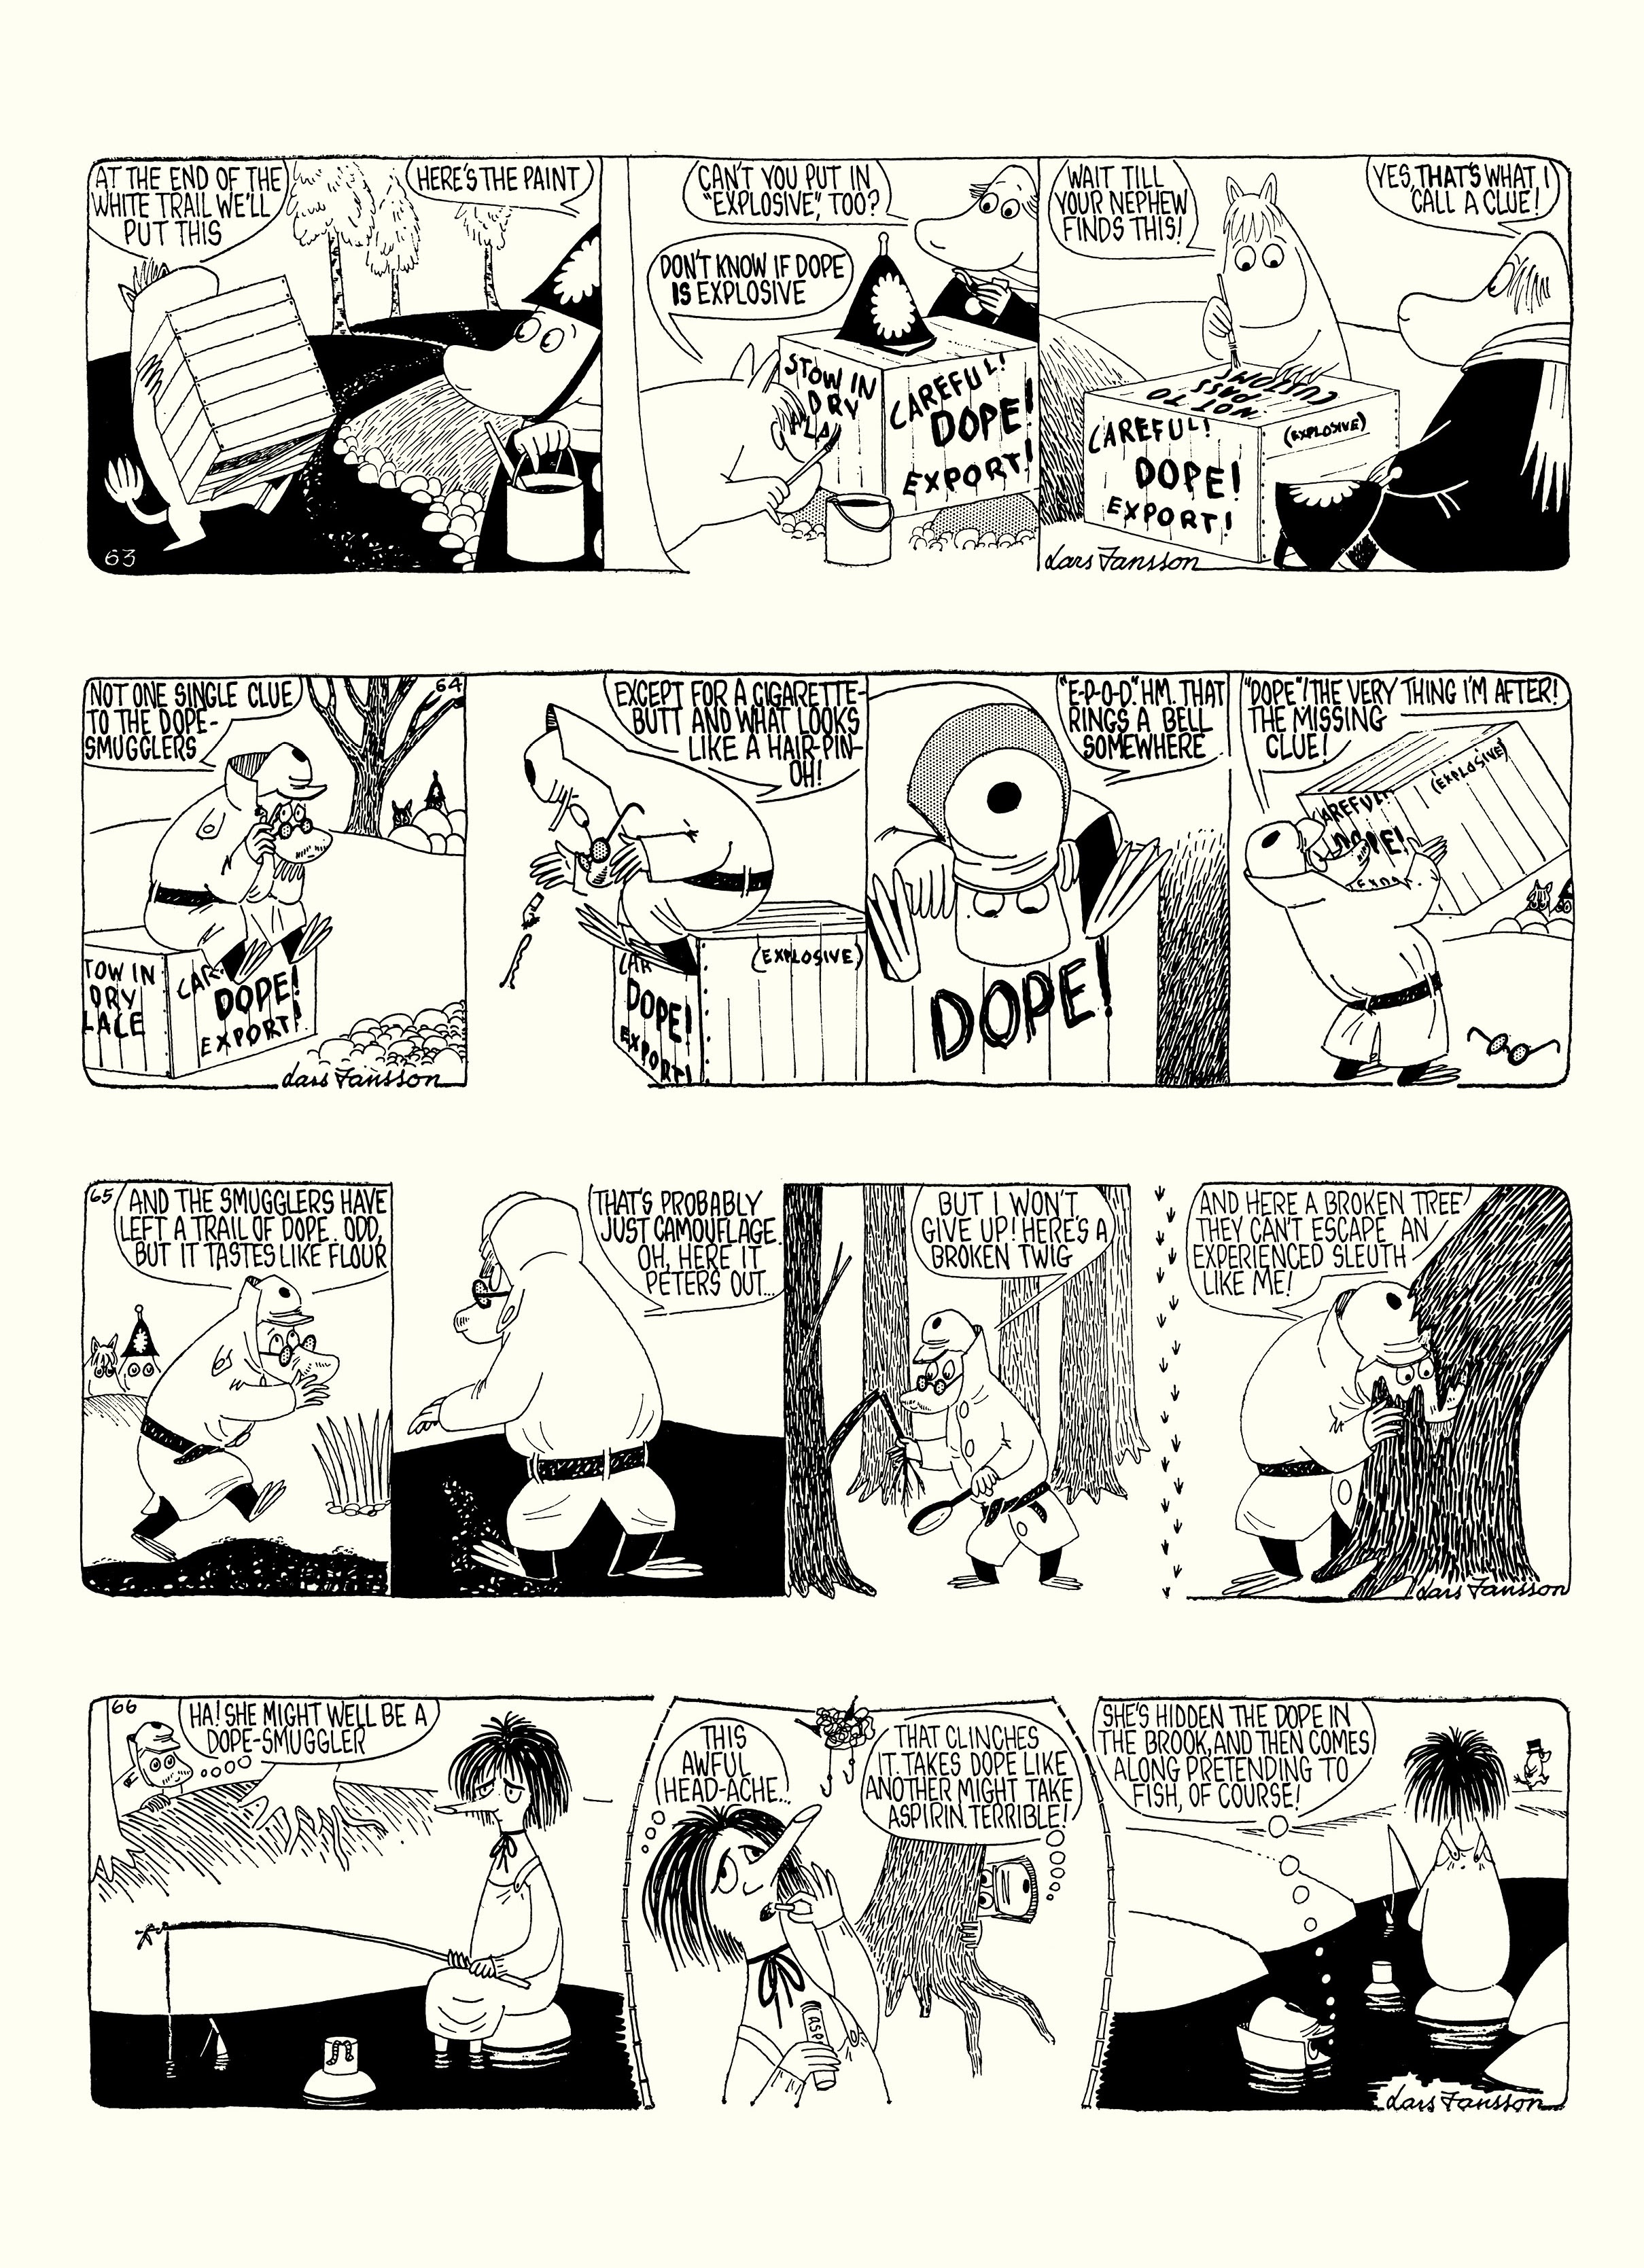 Read online Moomin: The Complete Lars Jansson Comic Strip comic -  Issue # TPB 8 - 87